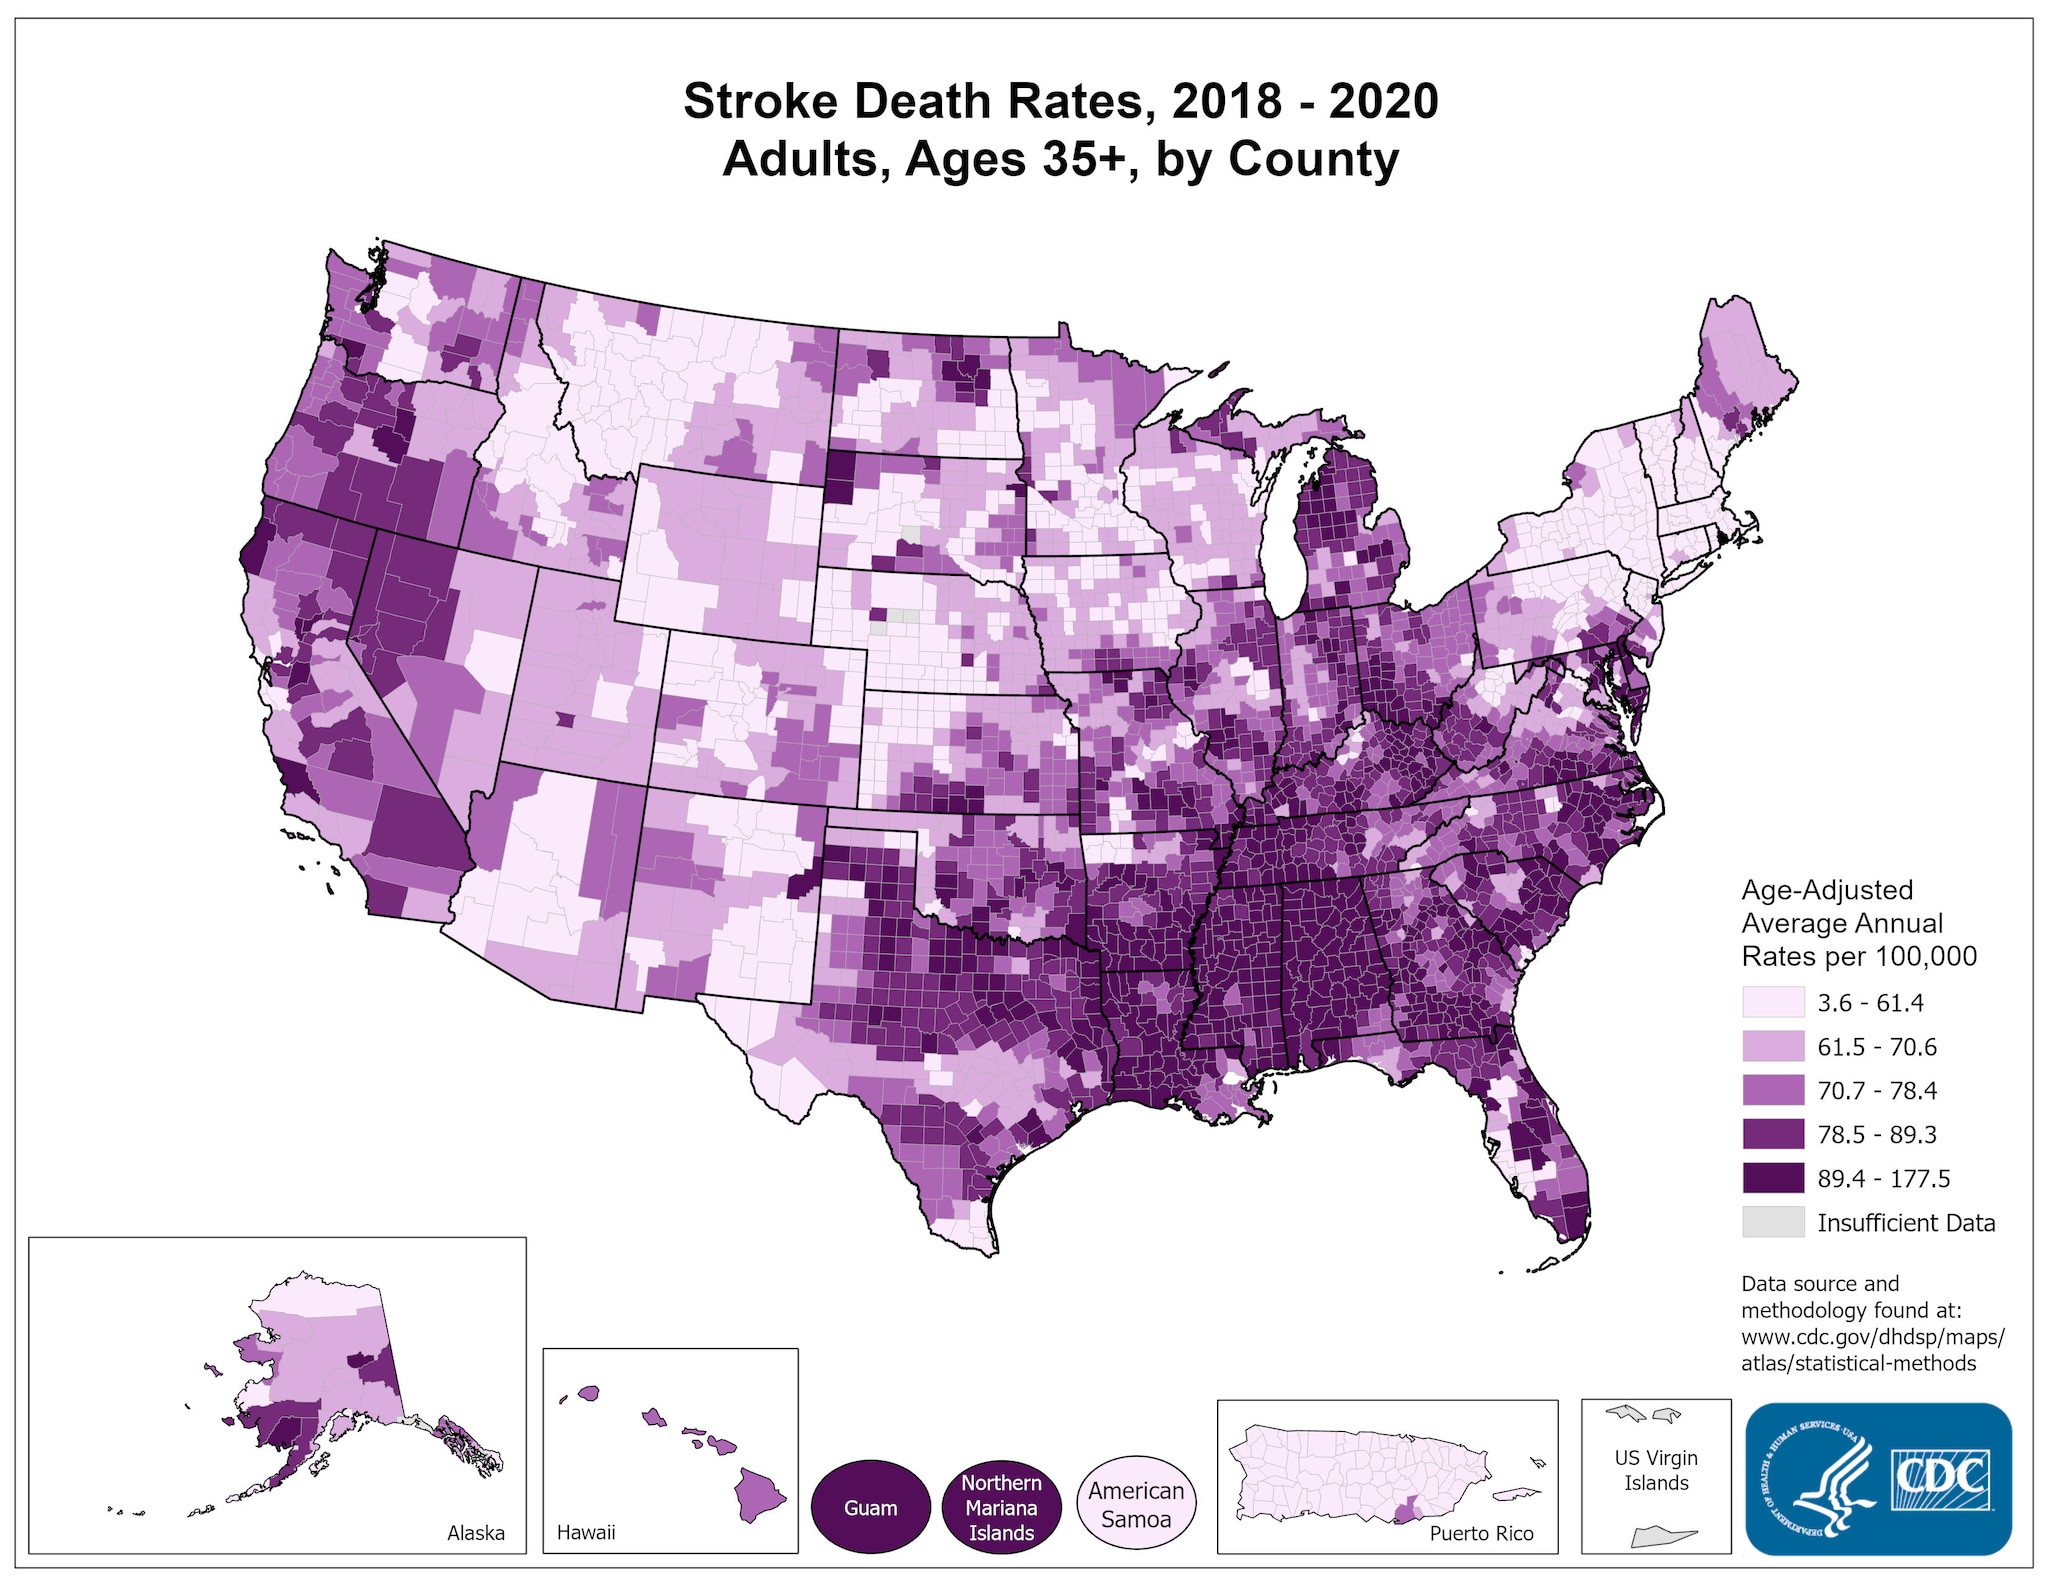 Stroke Death Rates for 2018 through 2020 for Adults Aged 35 Years and Older by County